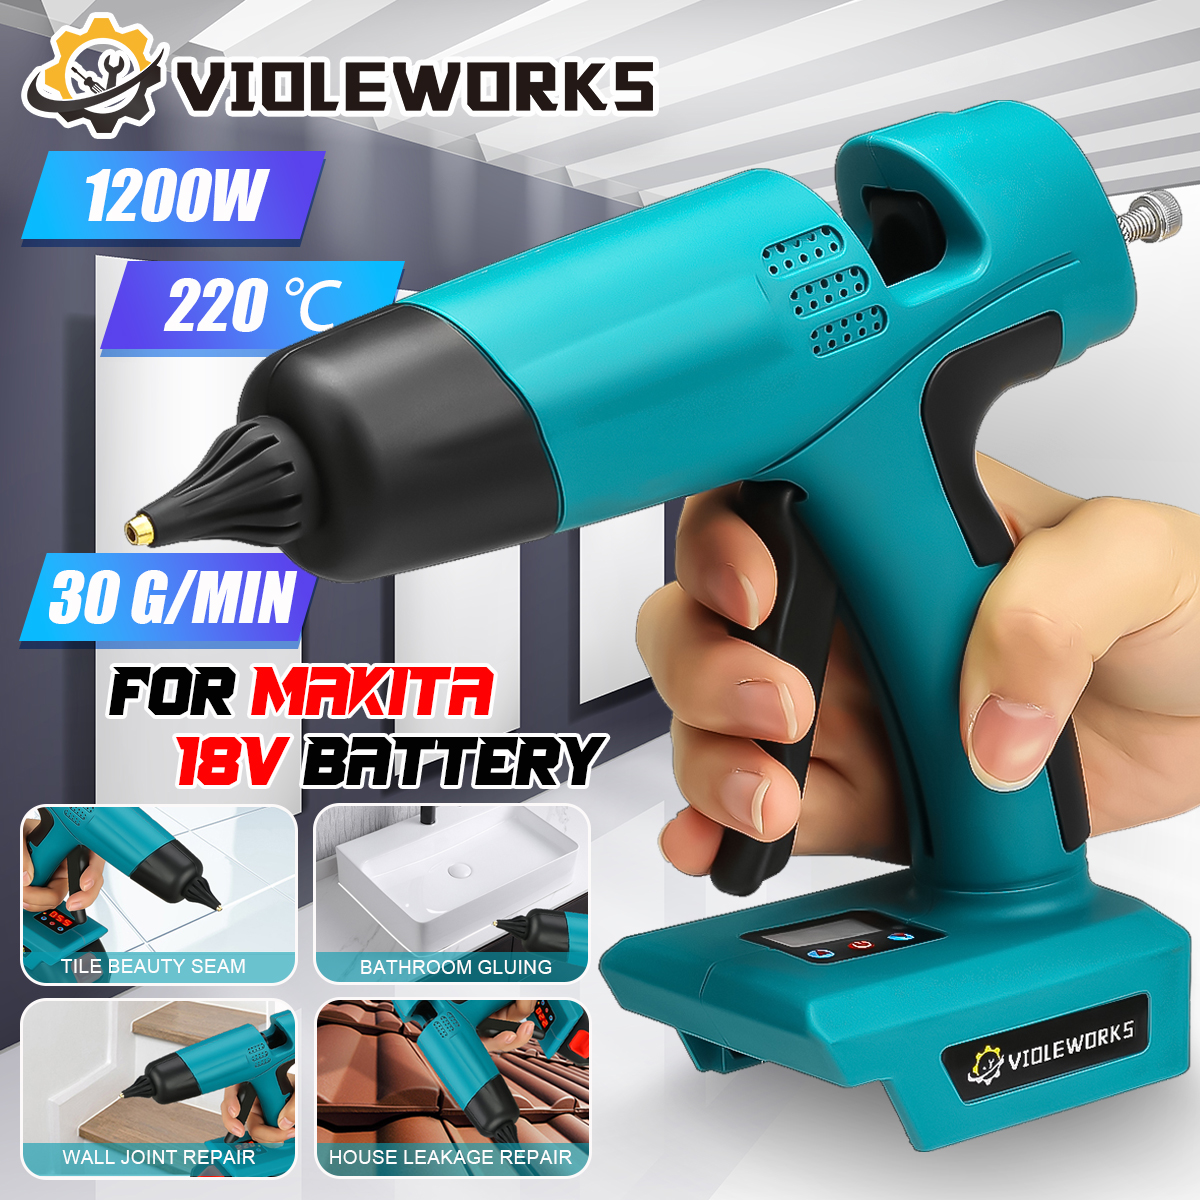 VIOLEWORKS-1200W-Glue-Guns-Cordless-Rechargeable-Hot-Glue-Applicator-Home-Improvement-Craft-DIY-for--1956103-1